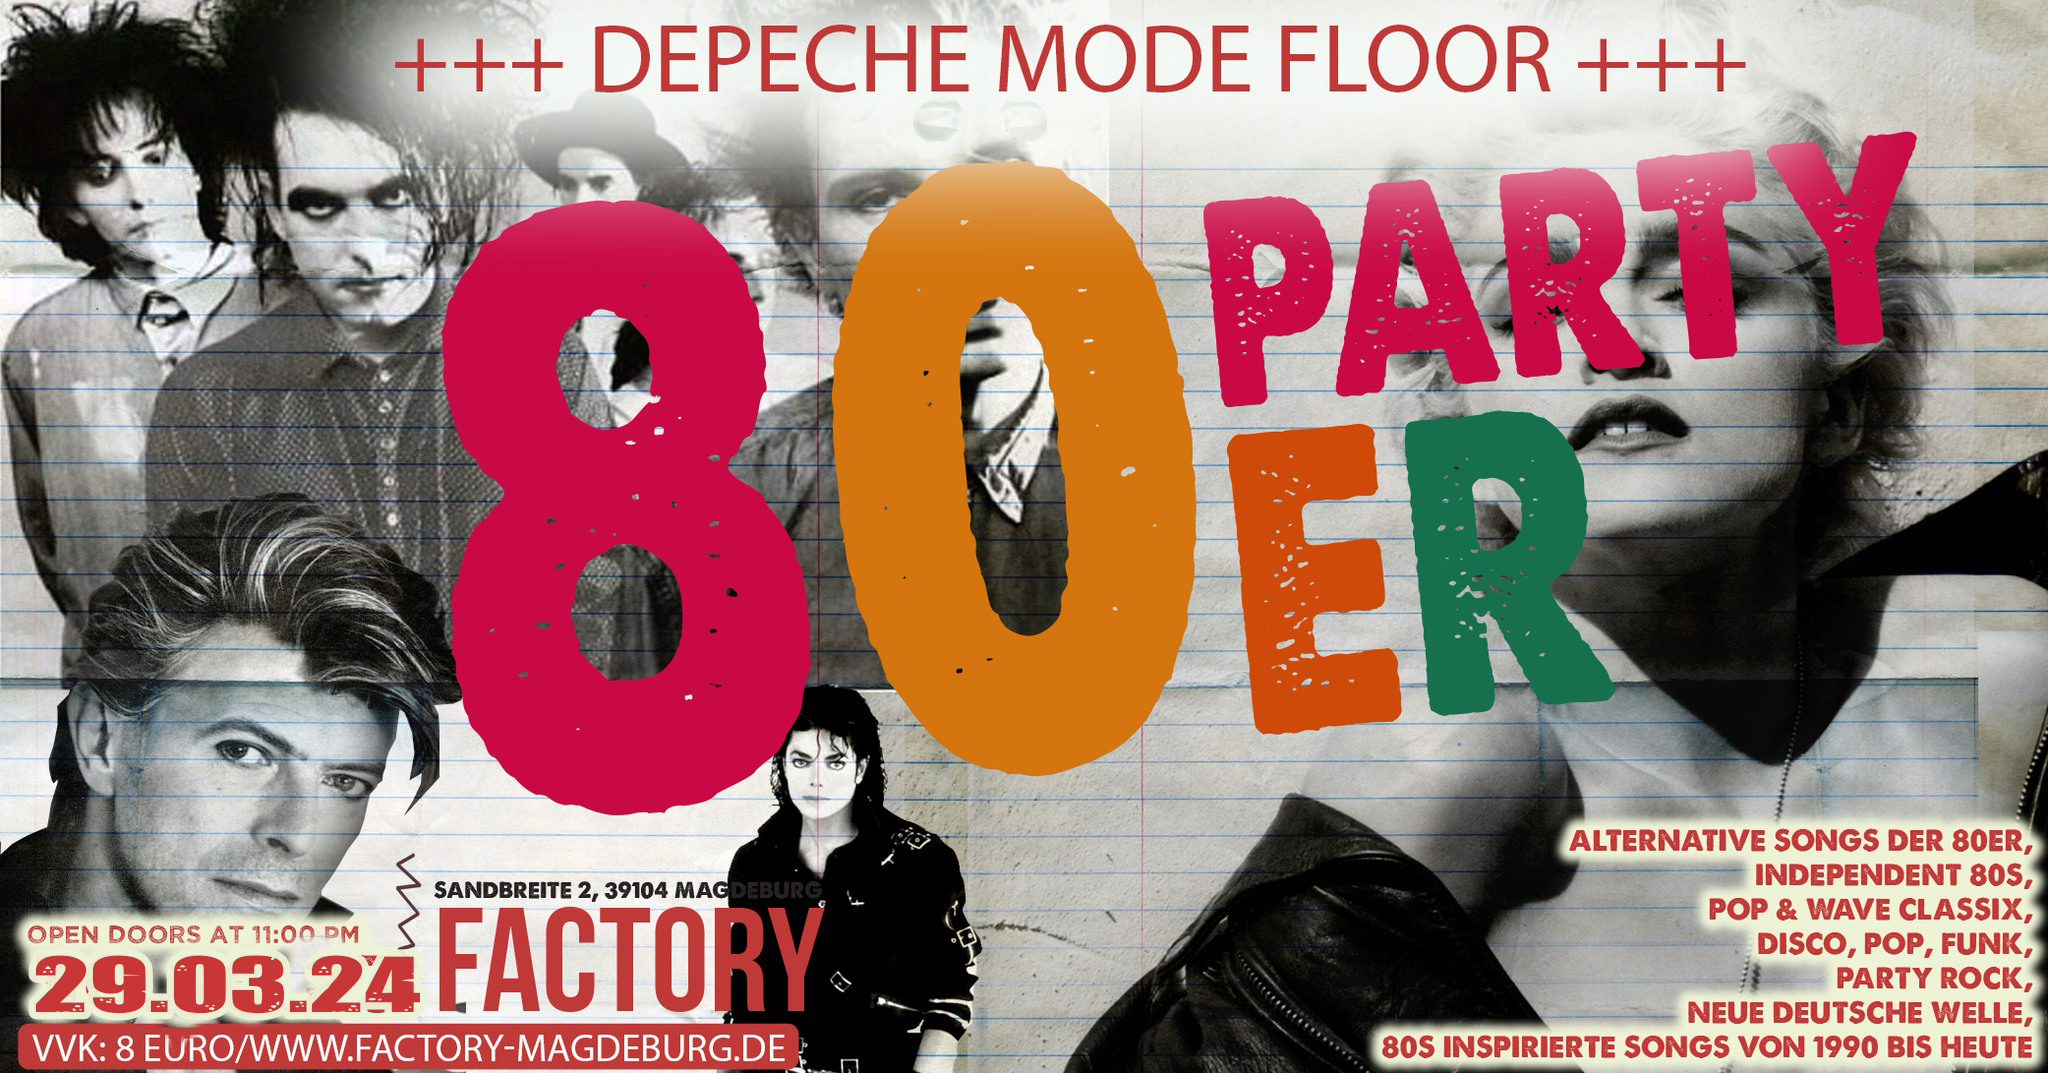 Forever Young // Die 80er Party + Depeche Mode Floor // 29.03.24